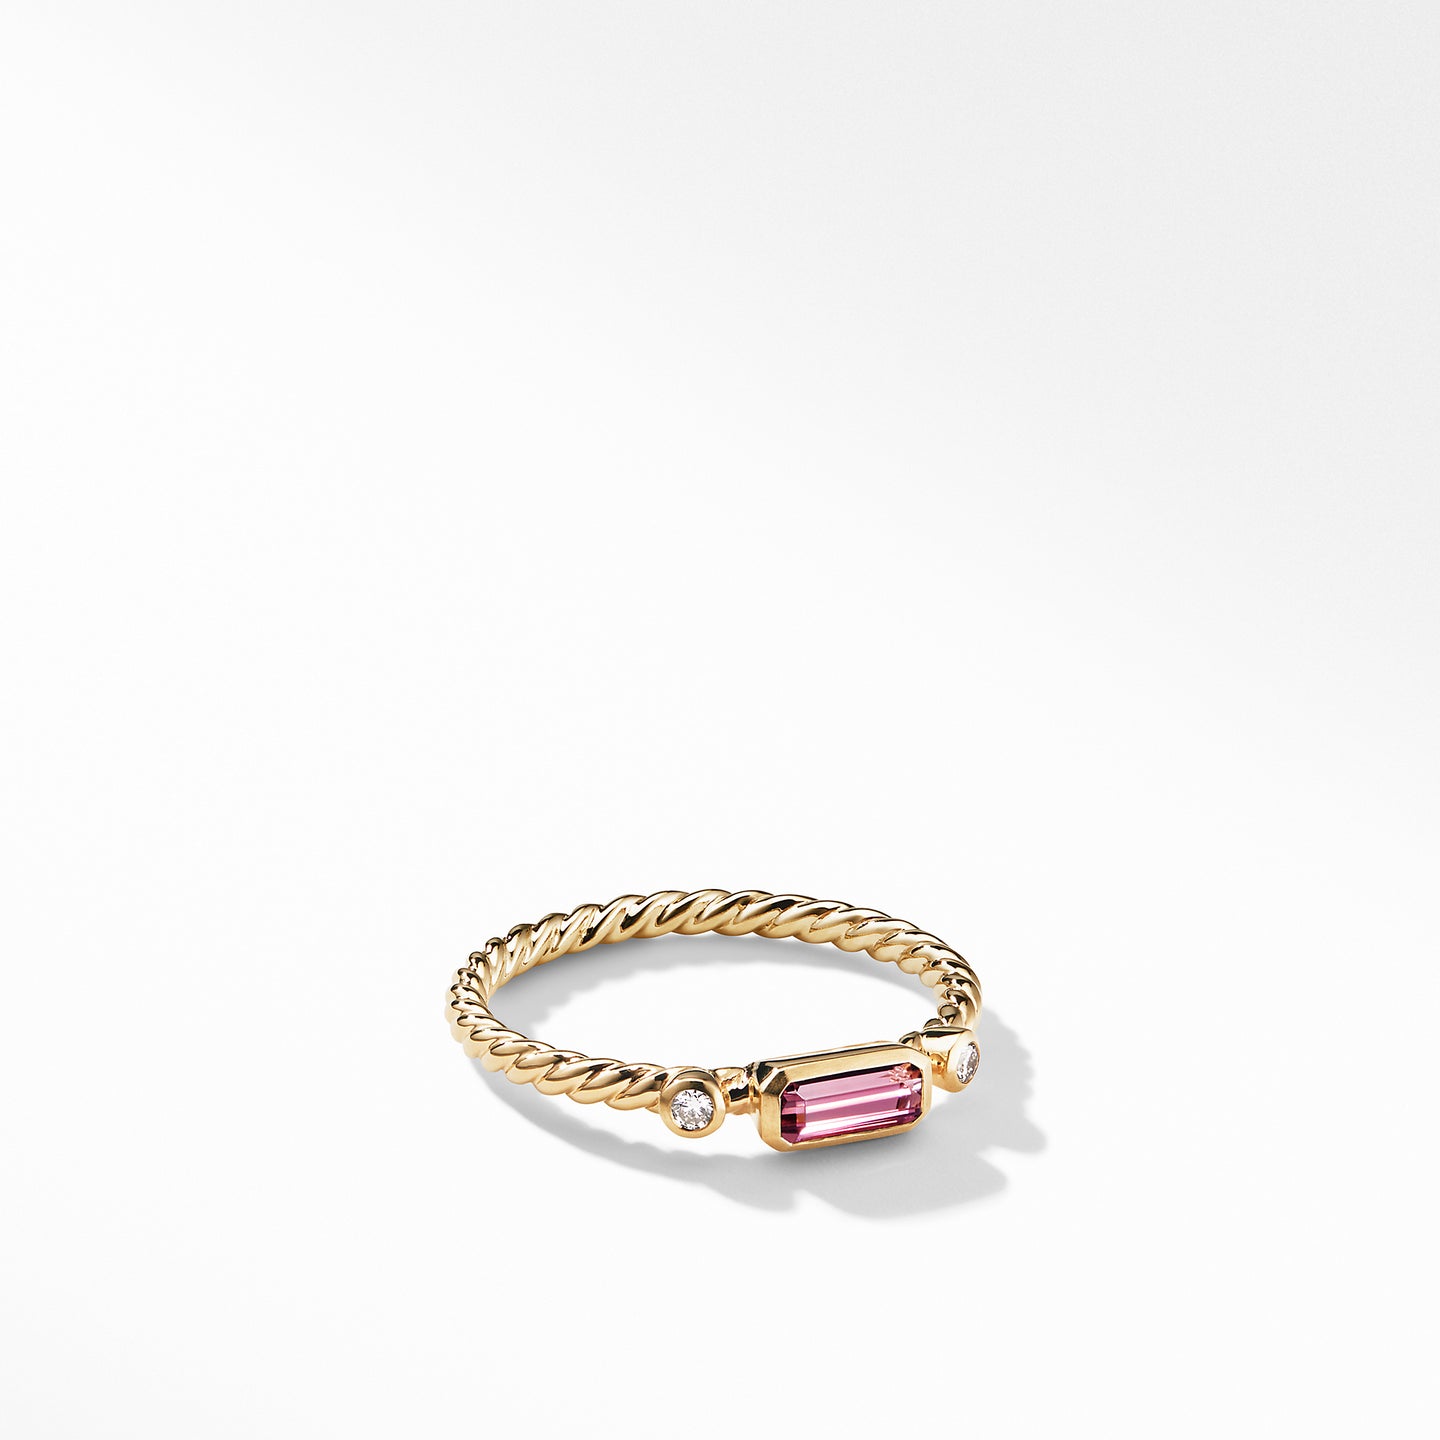 Novella Ring in Pink Tourmaline with Diamonds, Size 6